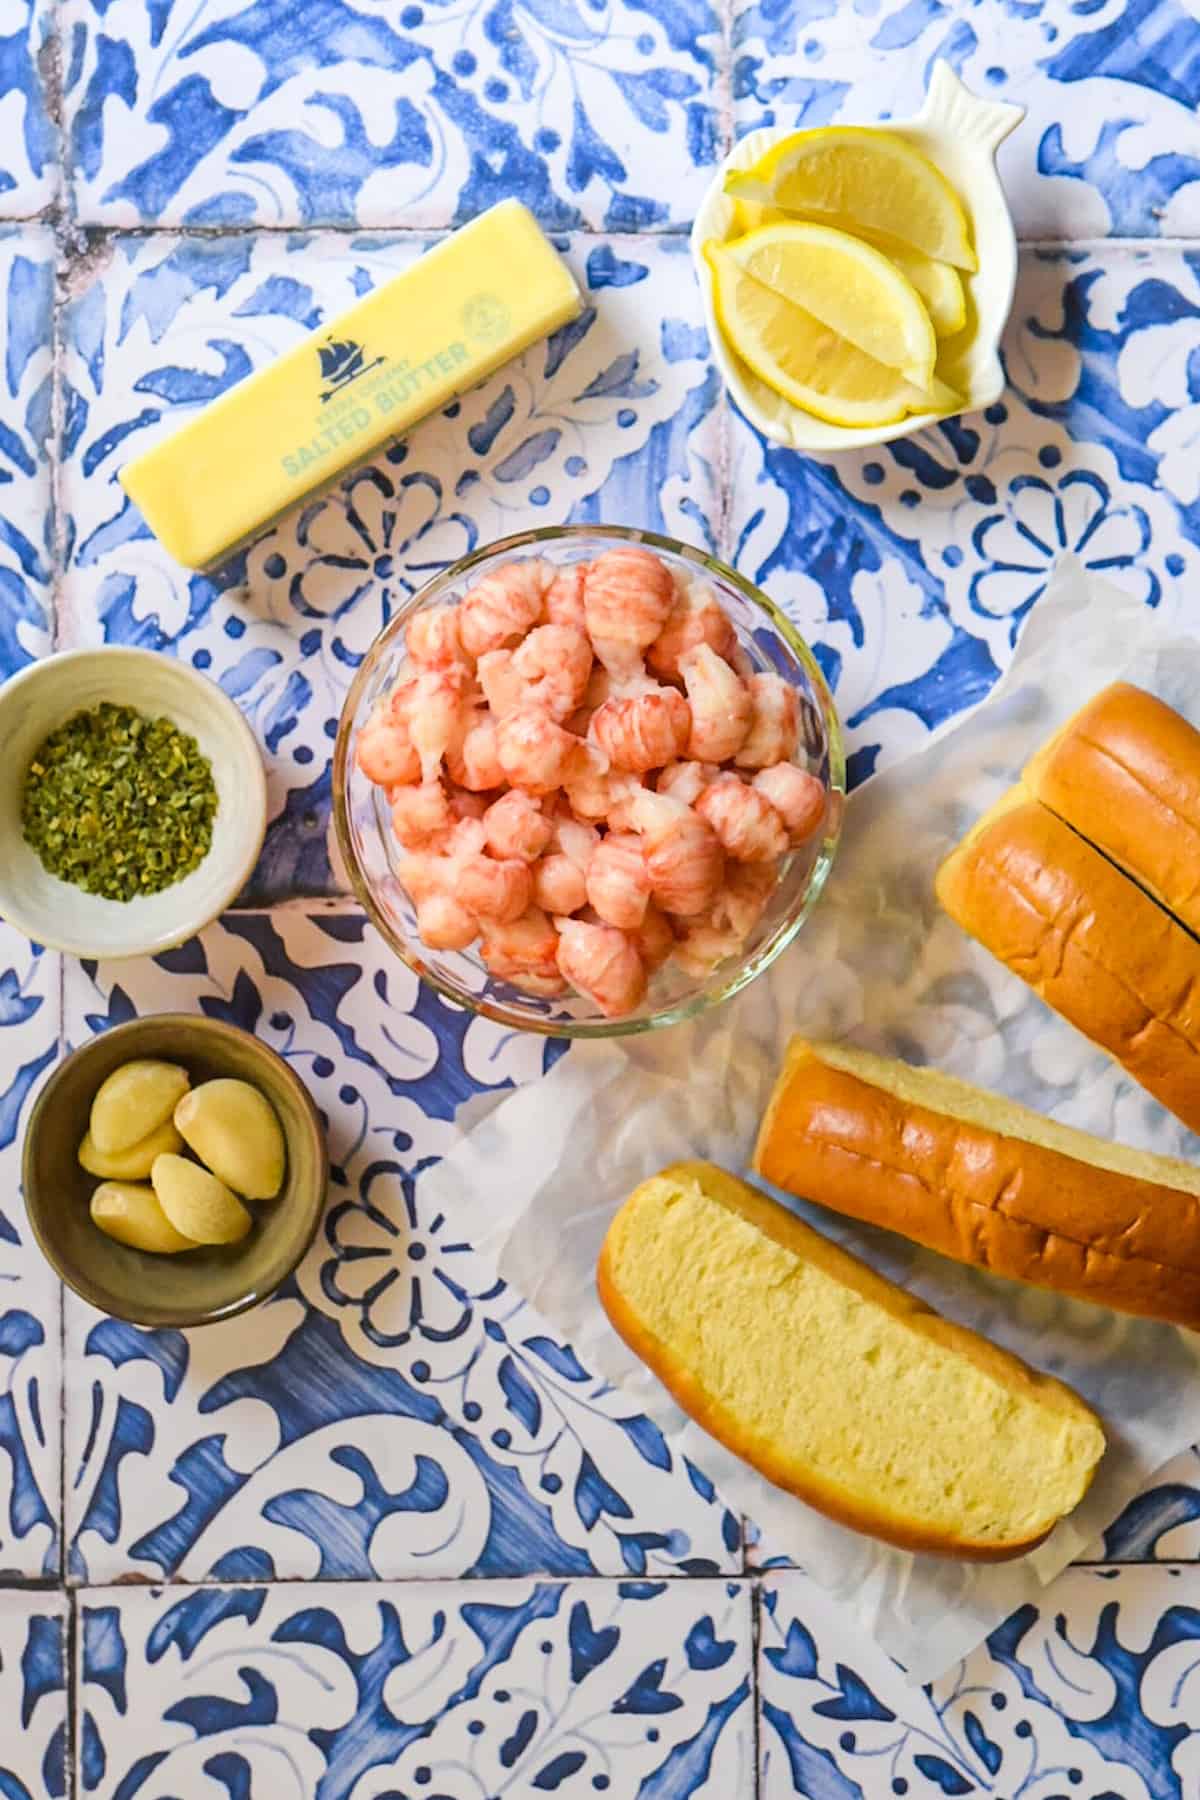 warm-langostino-rolls-with-brown-truffle-butter-ingredients